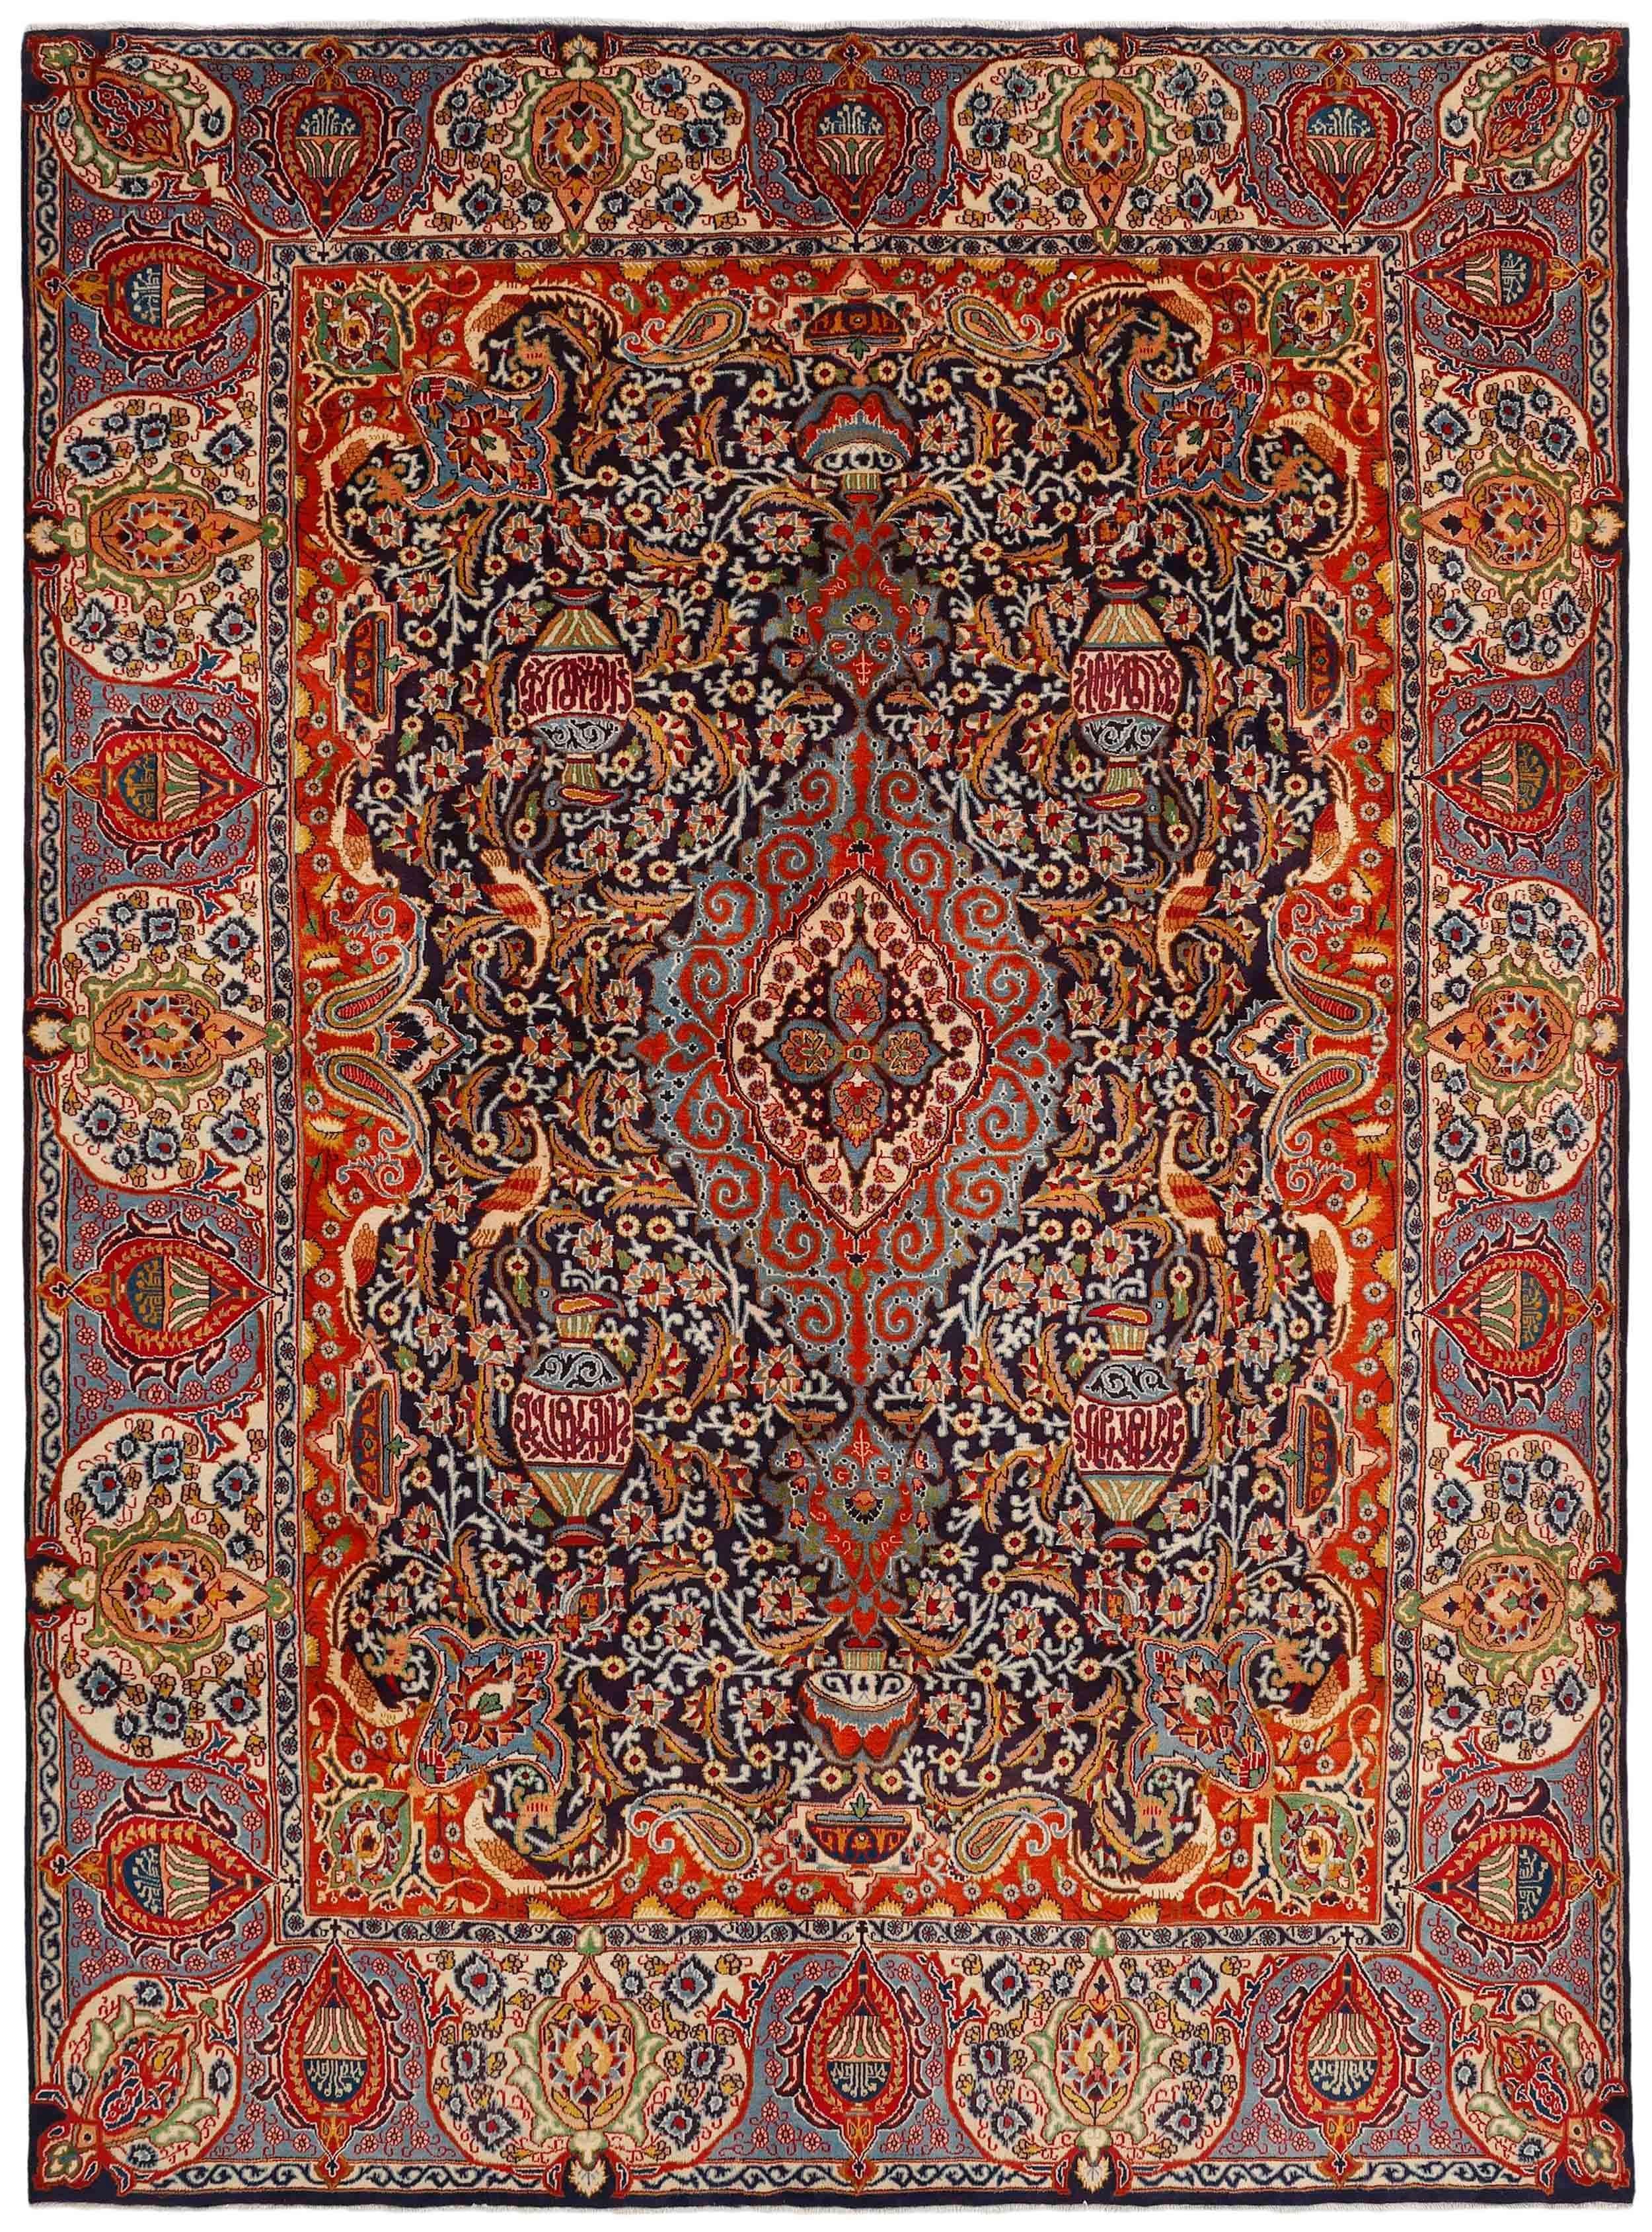 Authentic persian rug with a traditional floral design in red